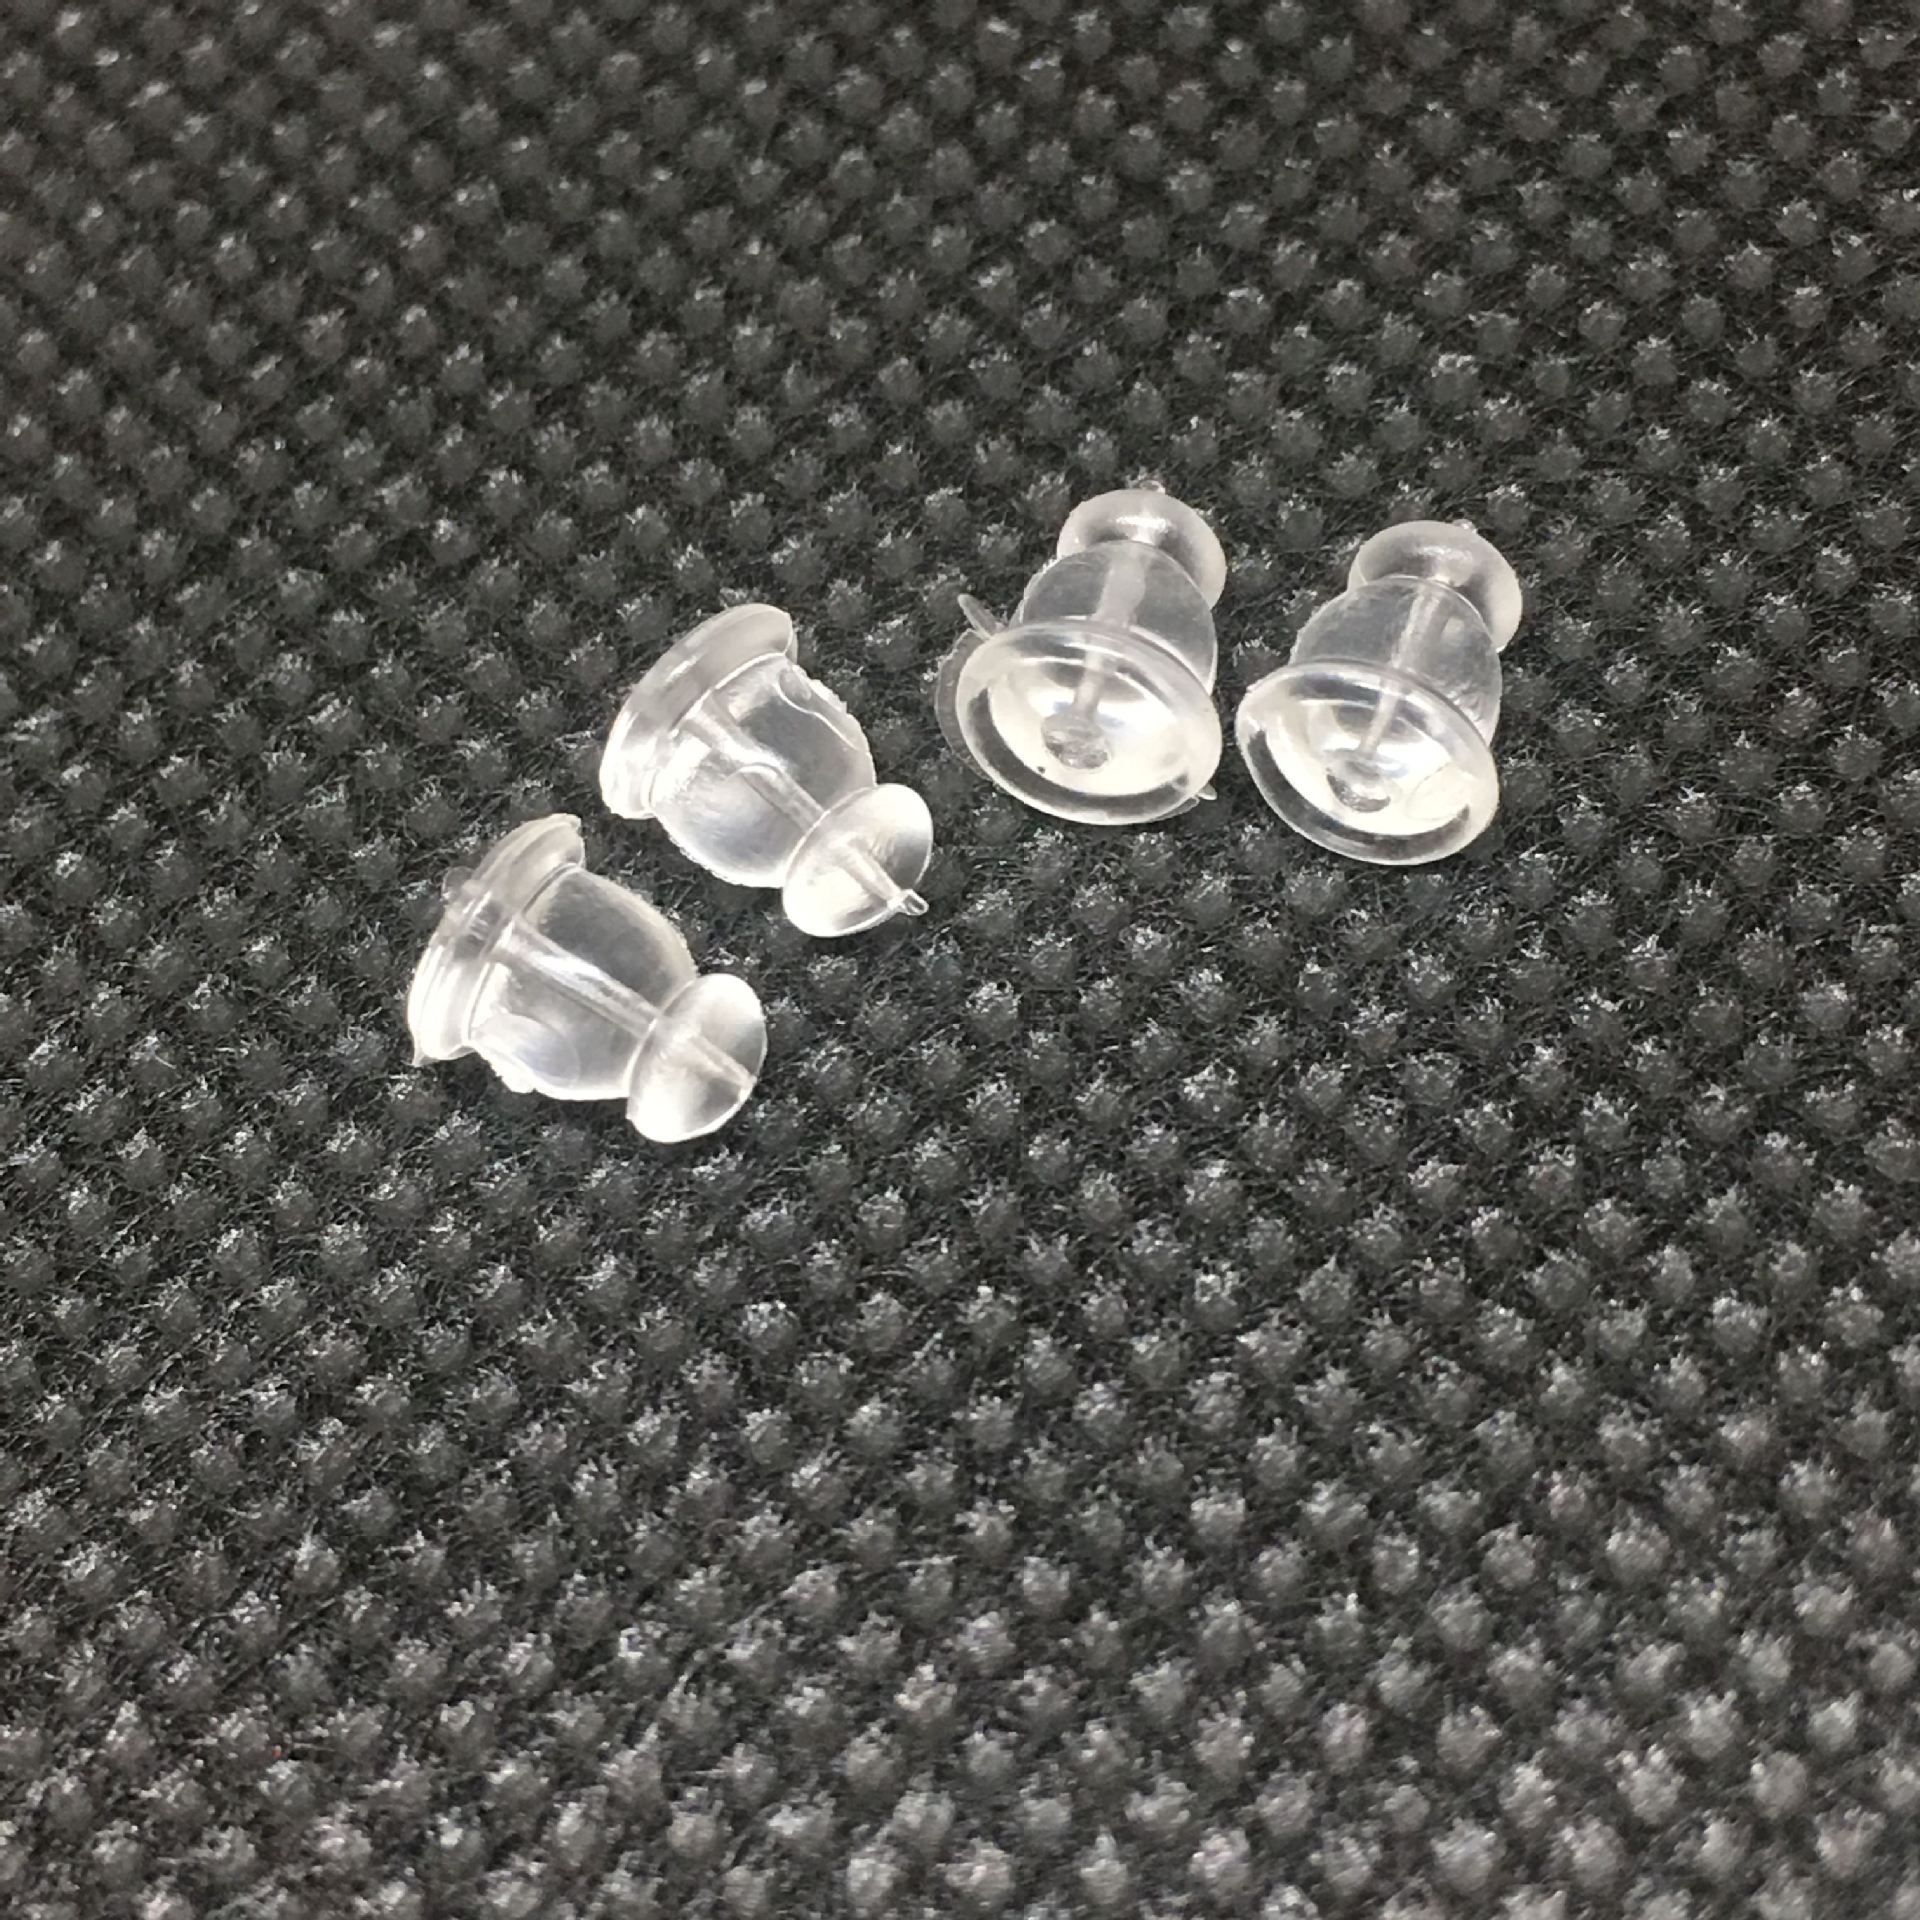 Cup shaped ear plugs